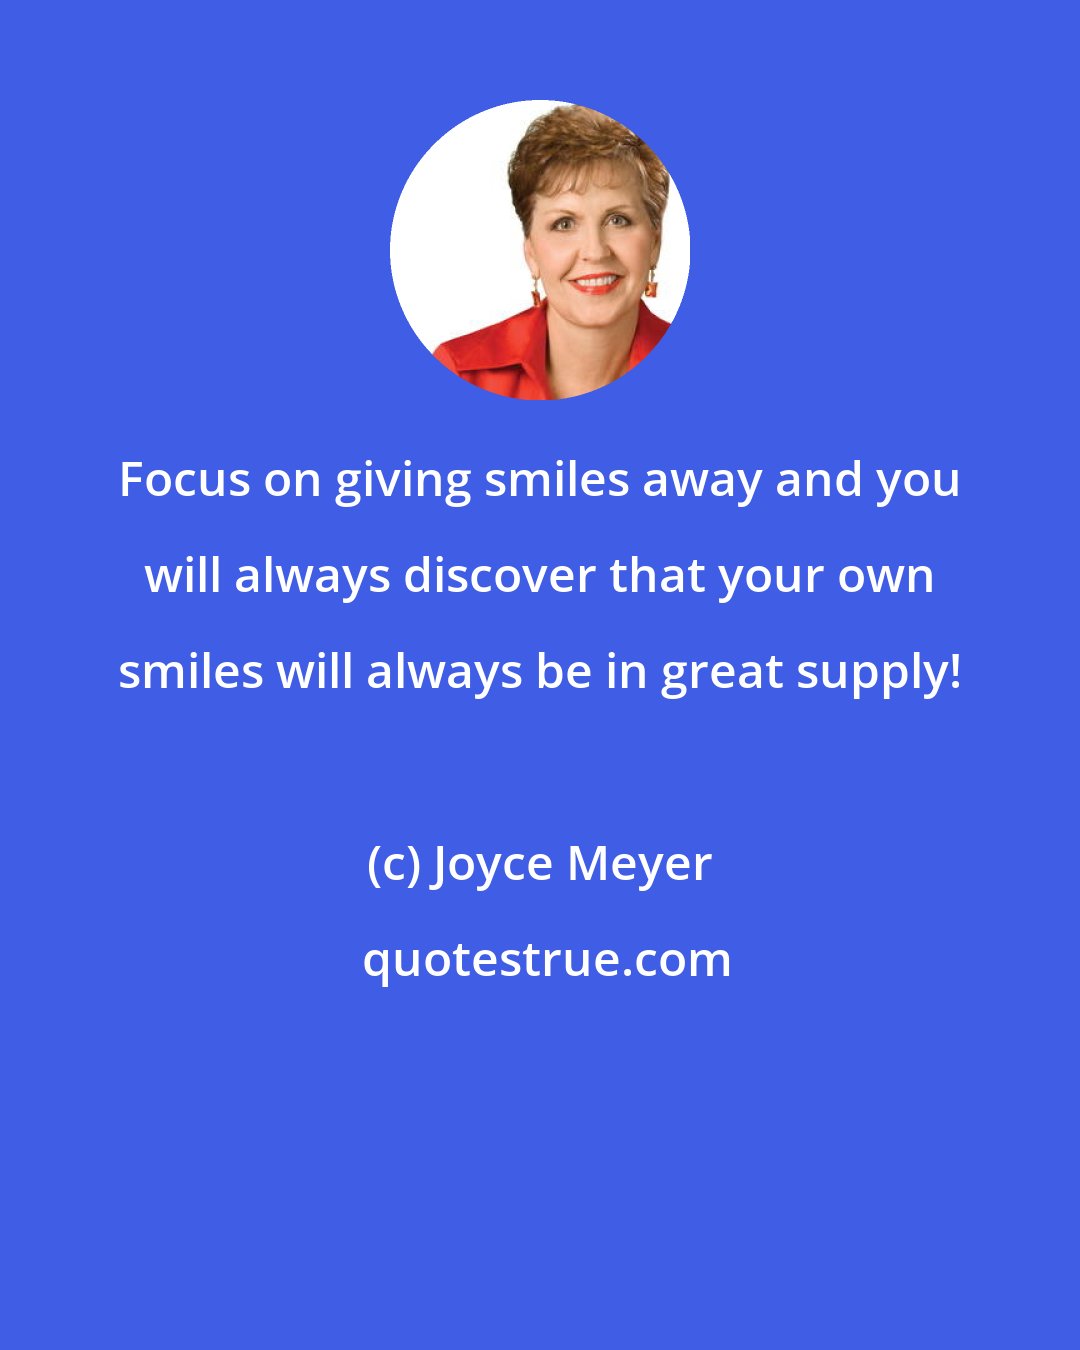 Joyce Meyer: Focus on giving smiles away and you will always discover that your own smiles will always be in great supply!